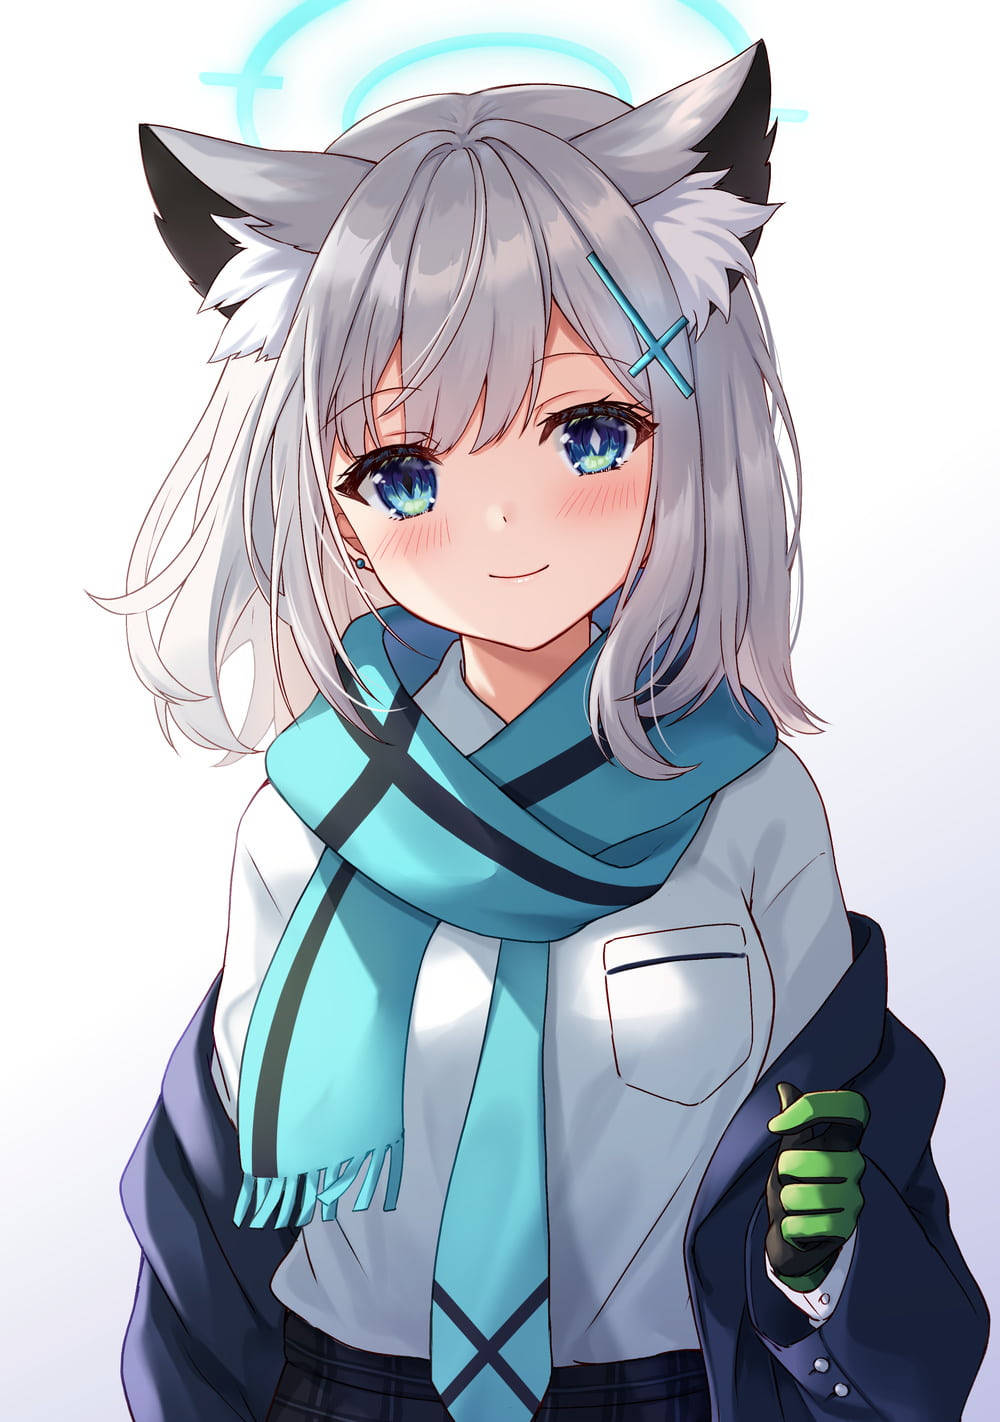 Aesthetic Anime Girl With Blue Scarf